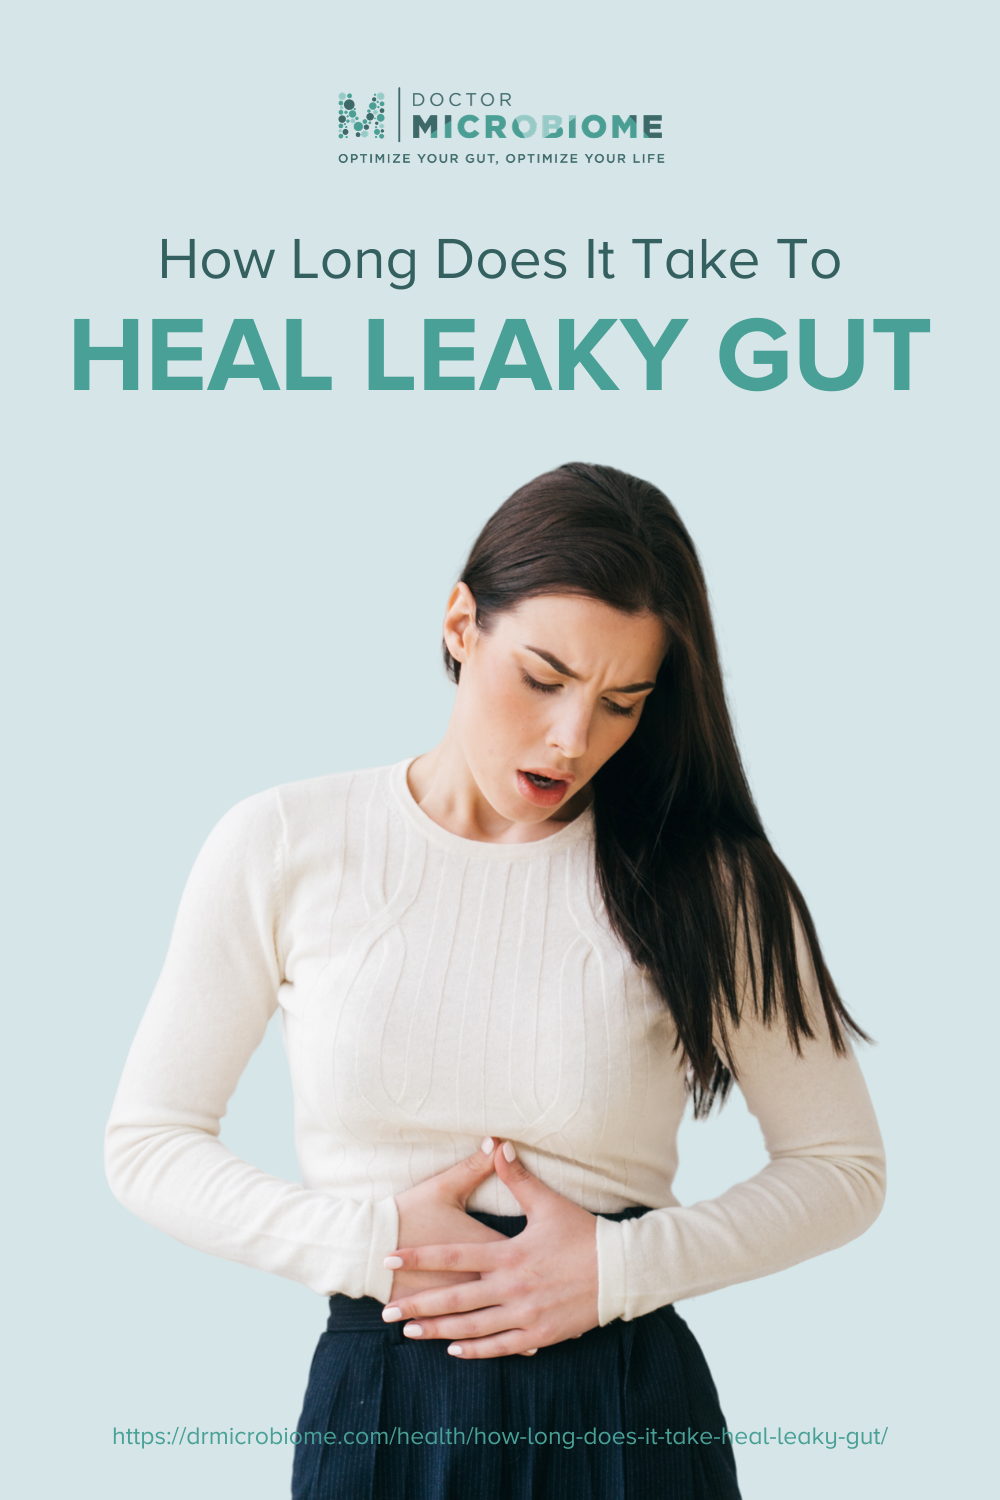 How Long Does It Take To Heal Leaky Gut?